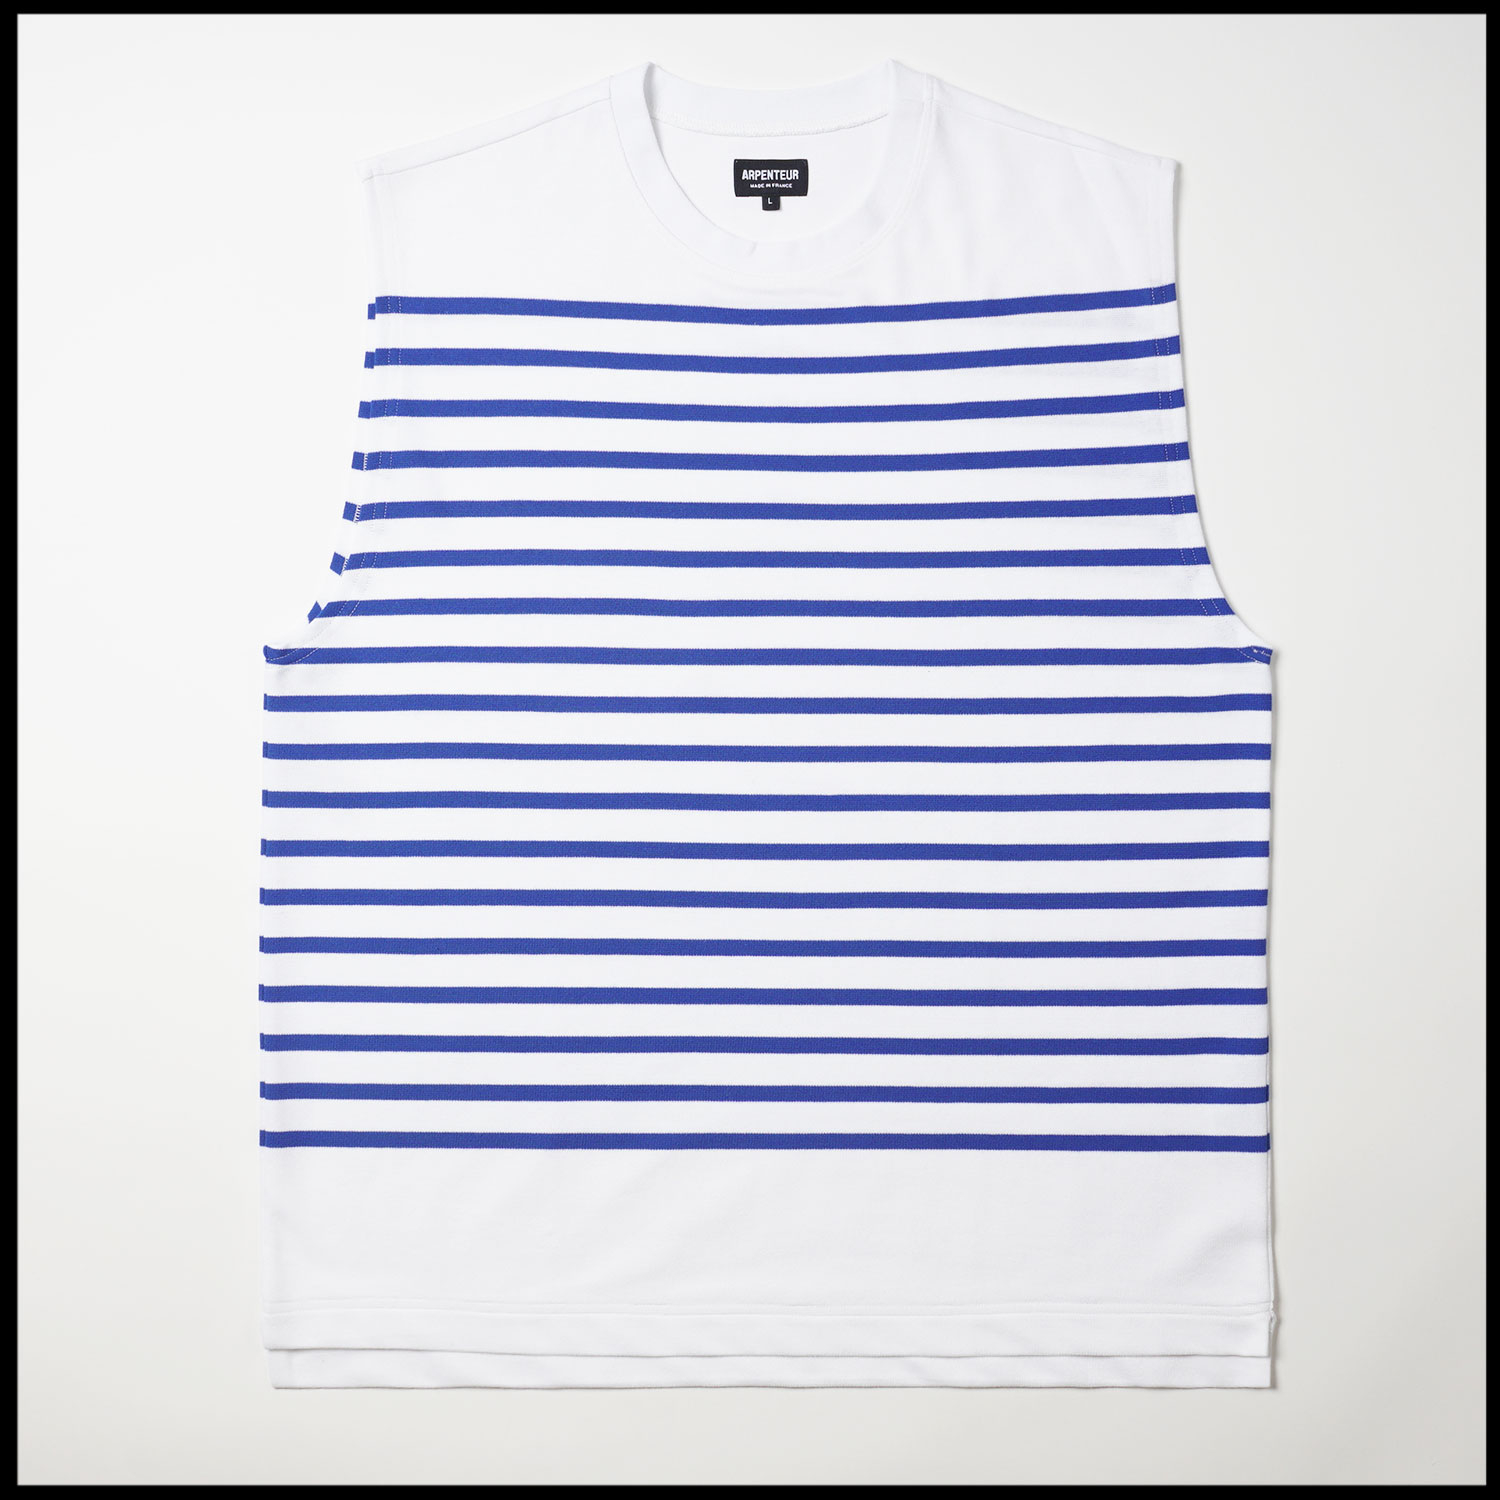 Aria t-shirt in White Royal color by Arpenteur